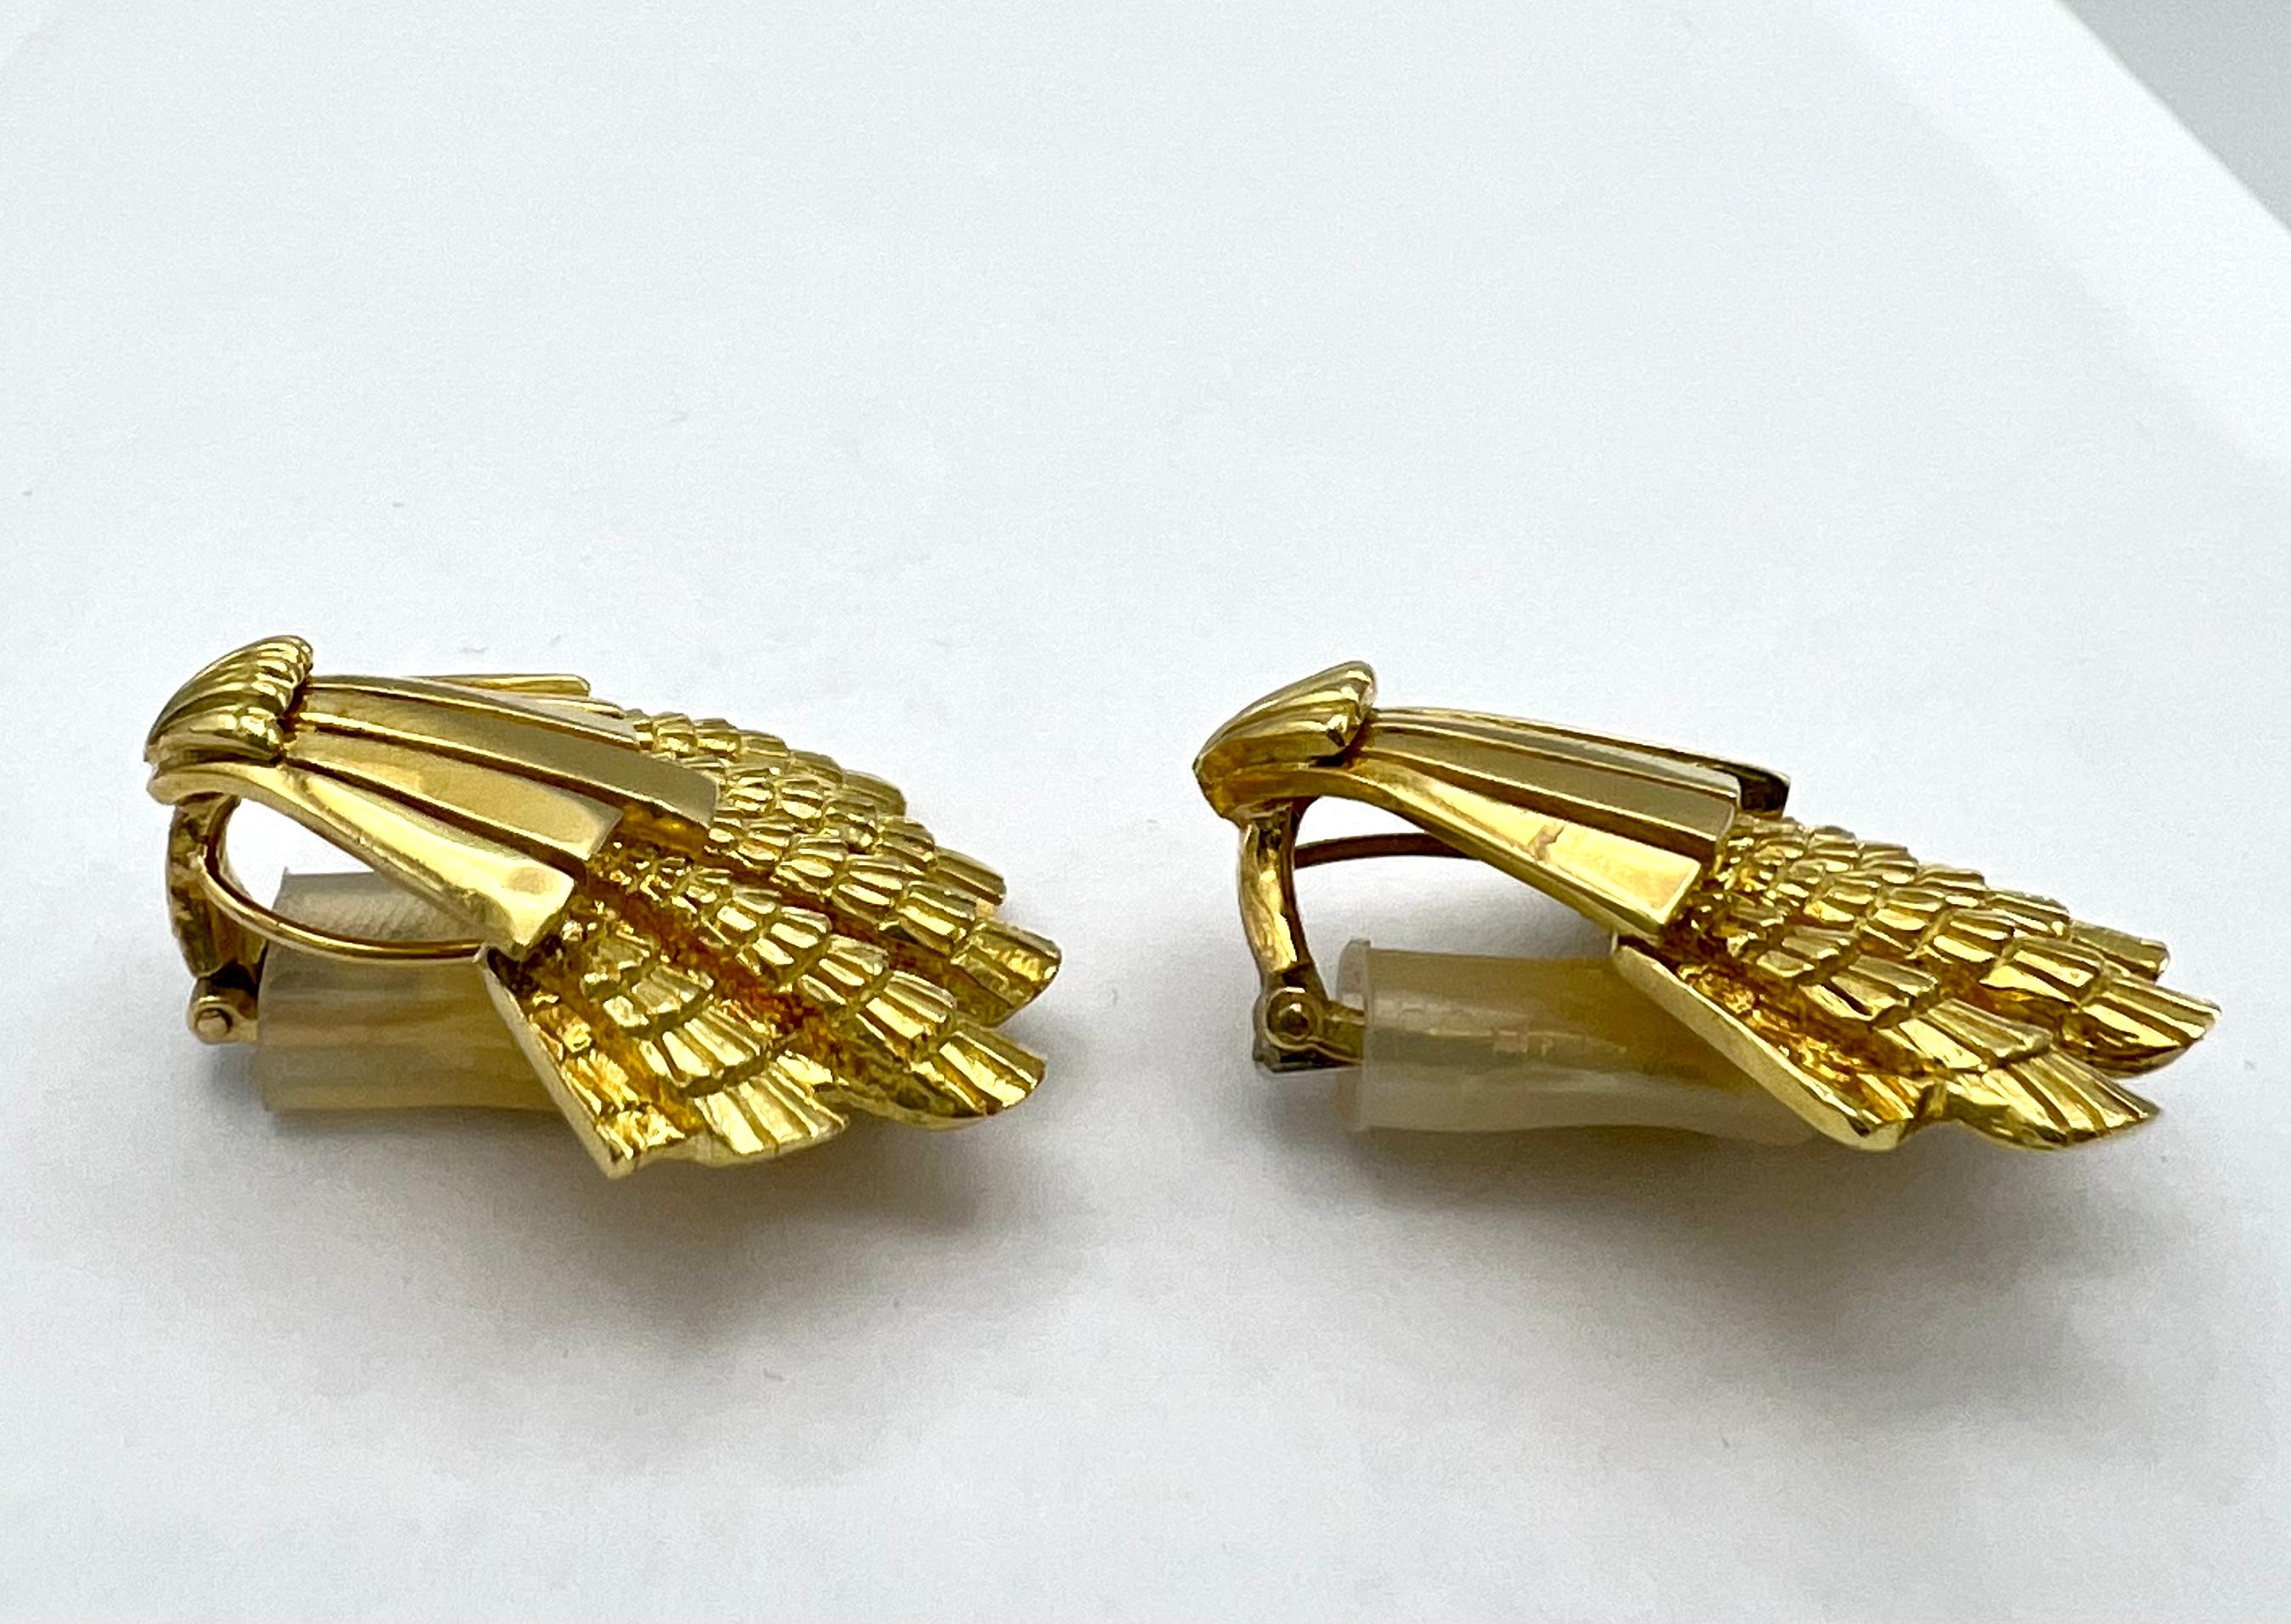 David Webb Gold Earrings, Vintage Shell Earrings In Excellent Condition For Sale In Beverly Hills, CA